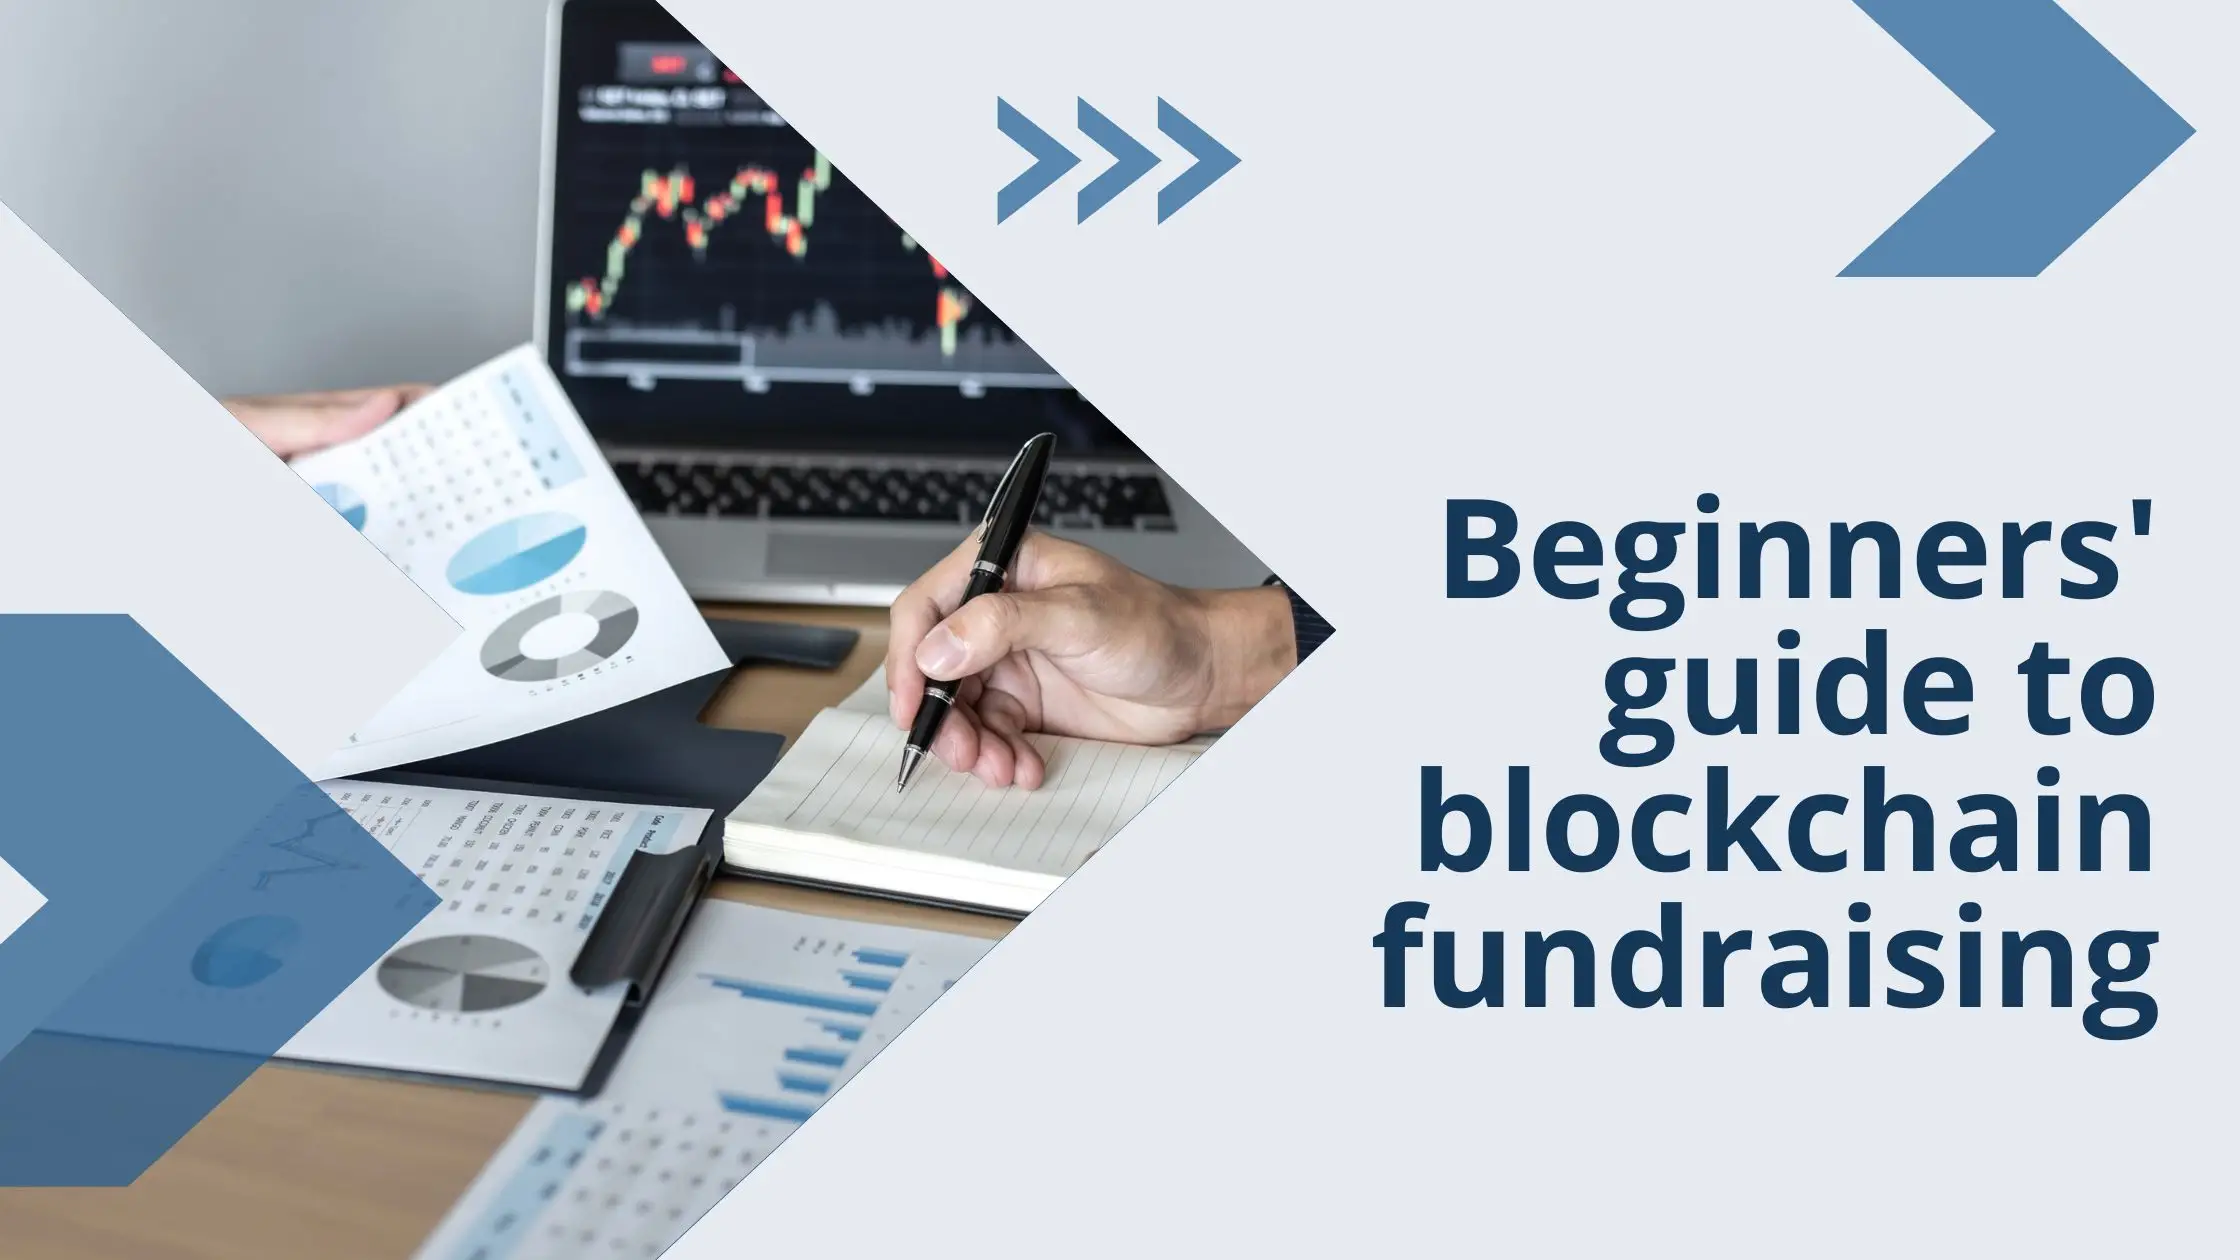 Beginners’ guide to blockchain fundraising